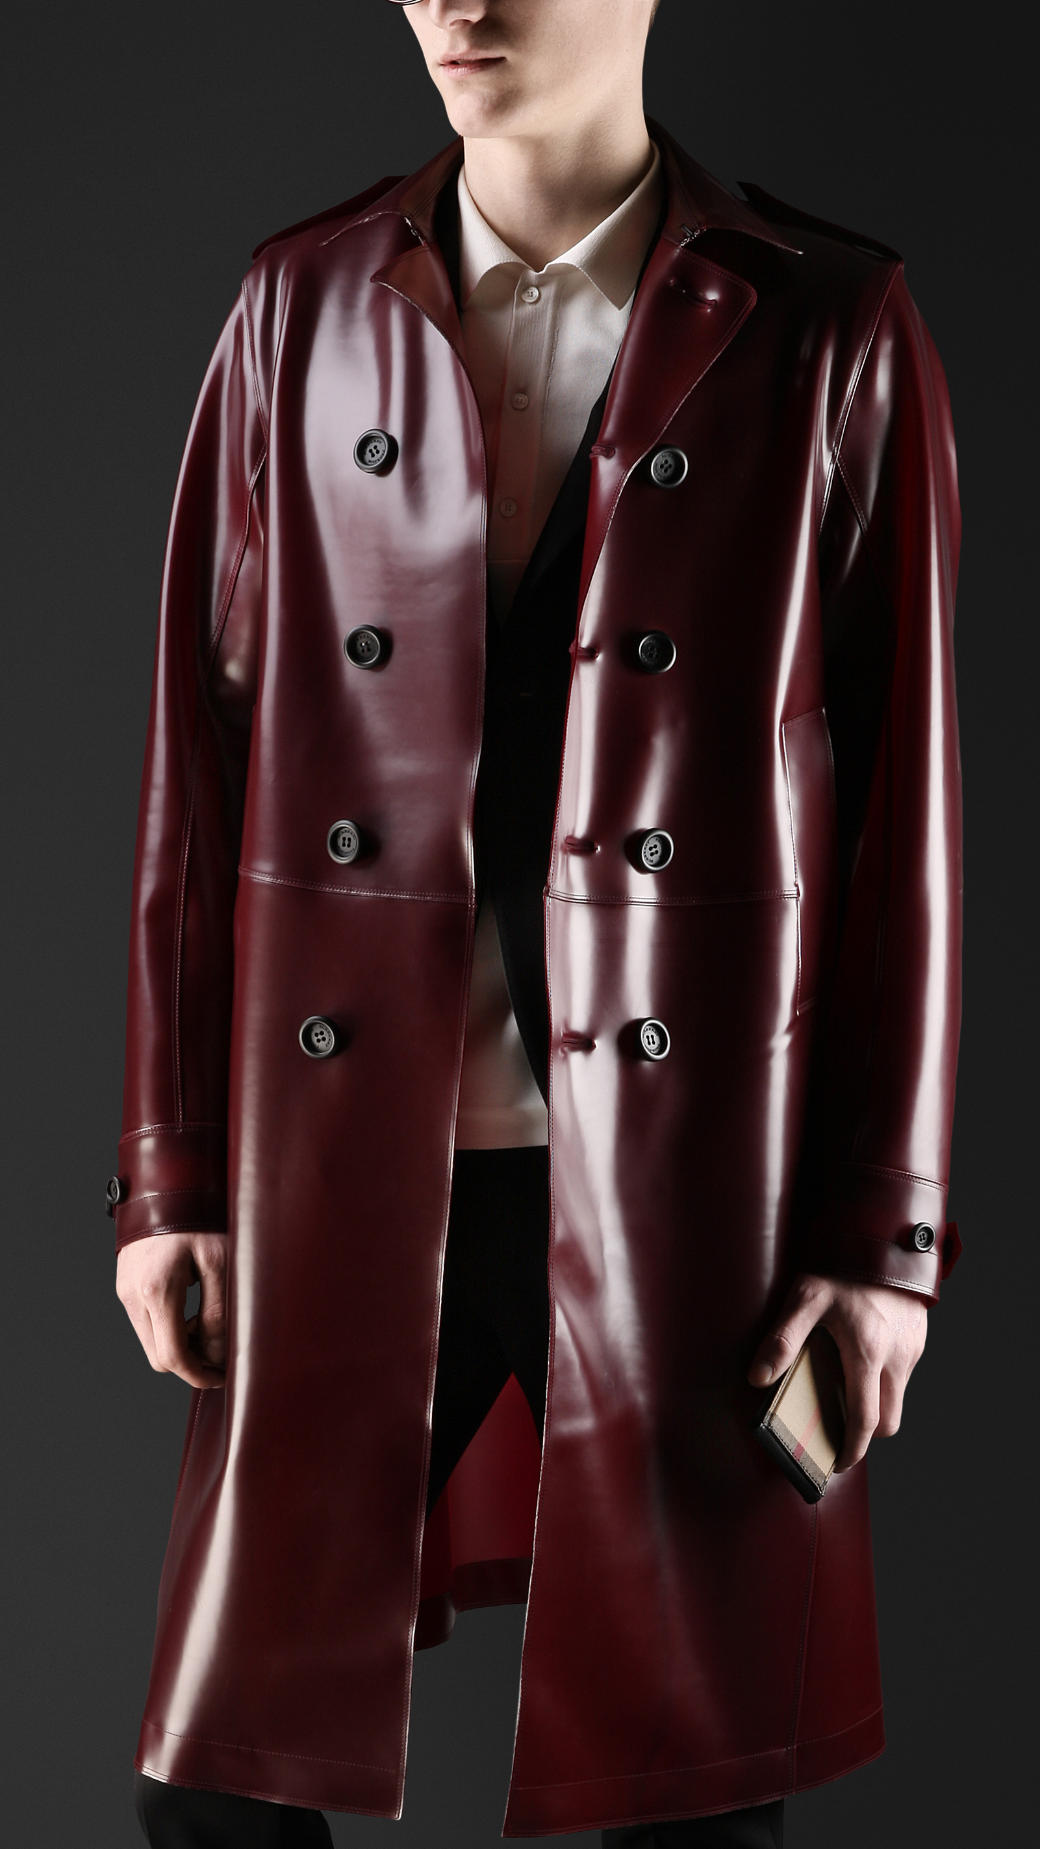 Lyst - Burberry Translucent Rubber Trench Coat in Purple for Men